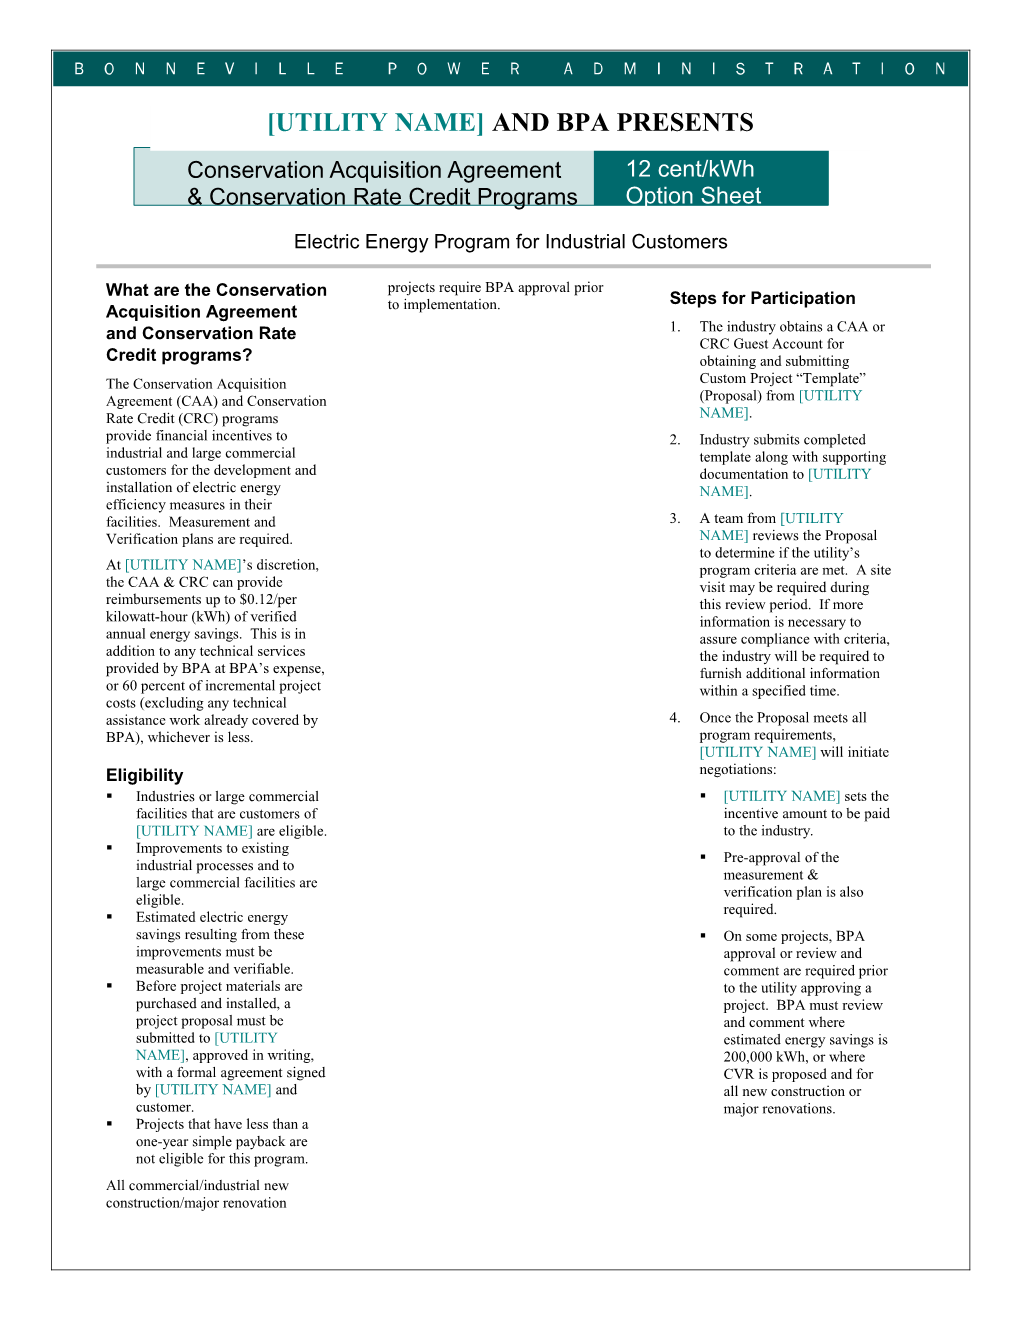 Conservation Acquisition Agreement & Conservation Rate Credit Programs